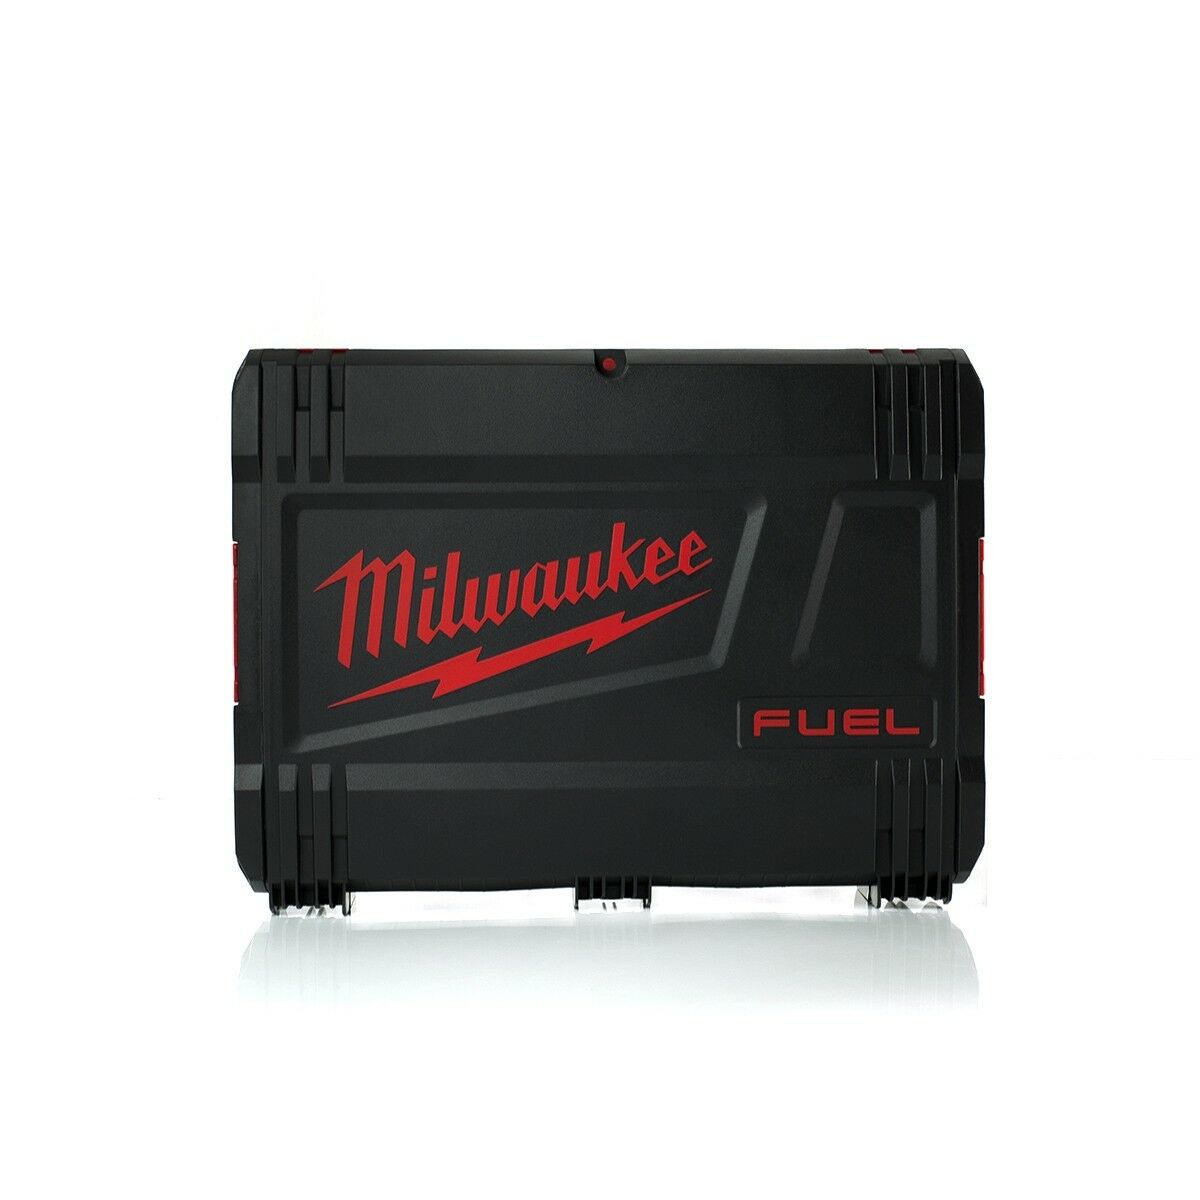 Milwaukee Case For the M12FIW Impact Wrench